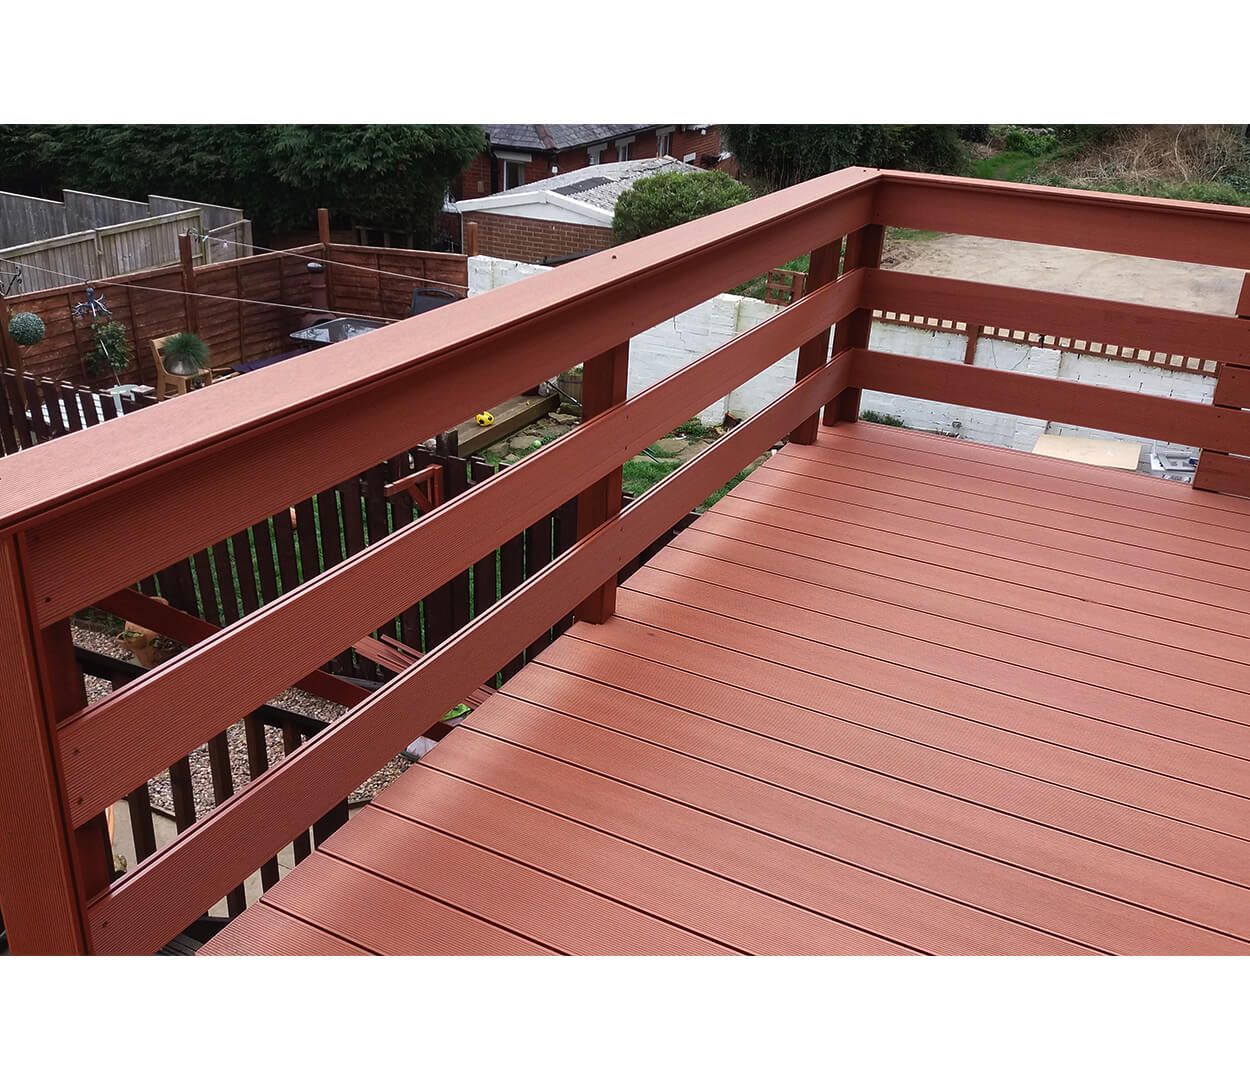 Balcony with steps in Redwood Colour